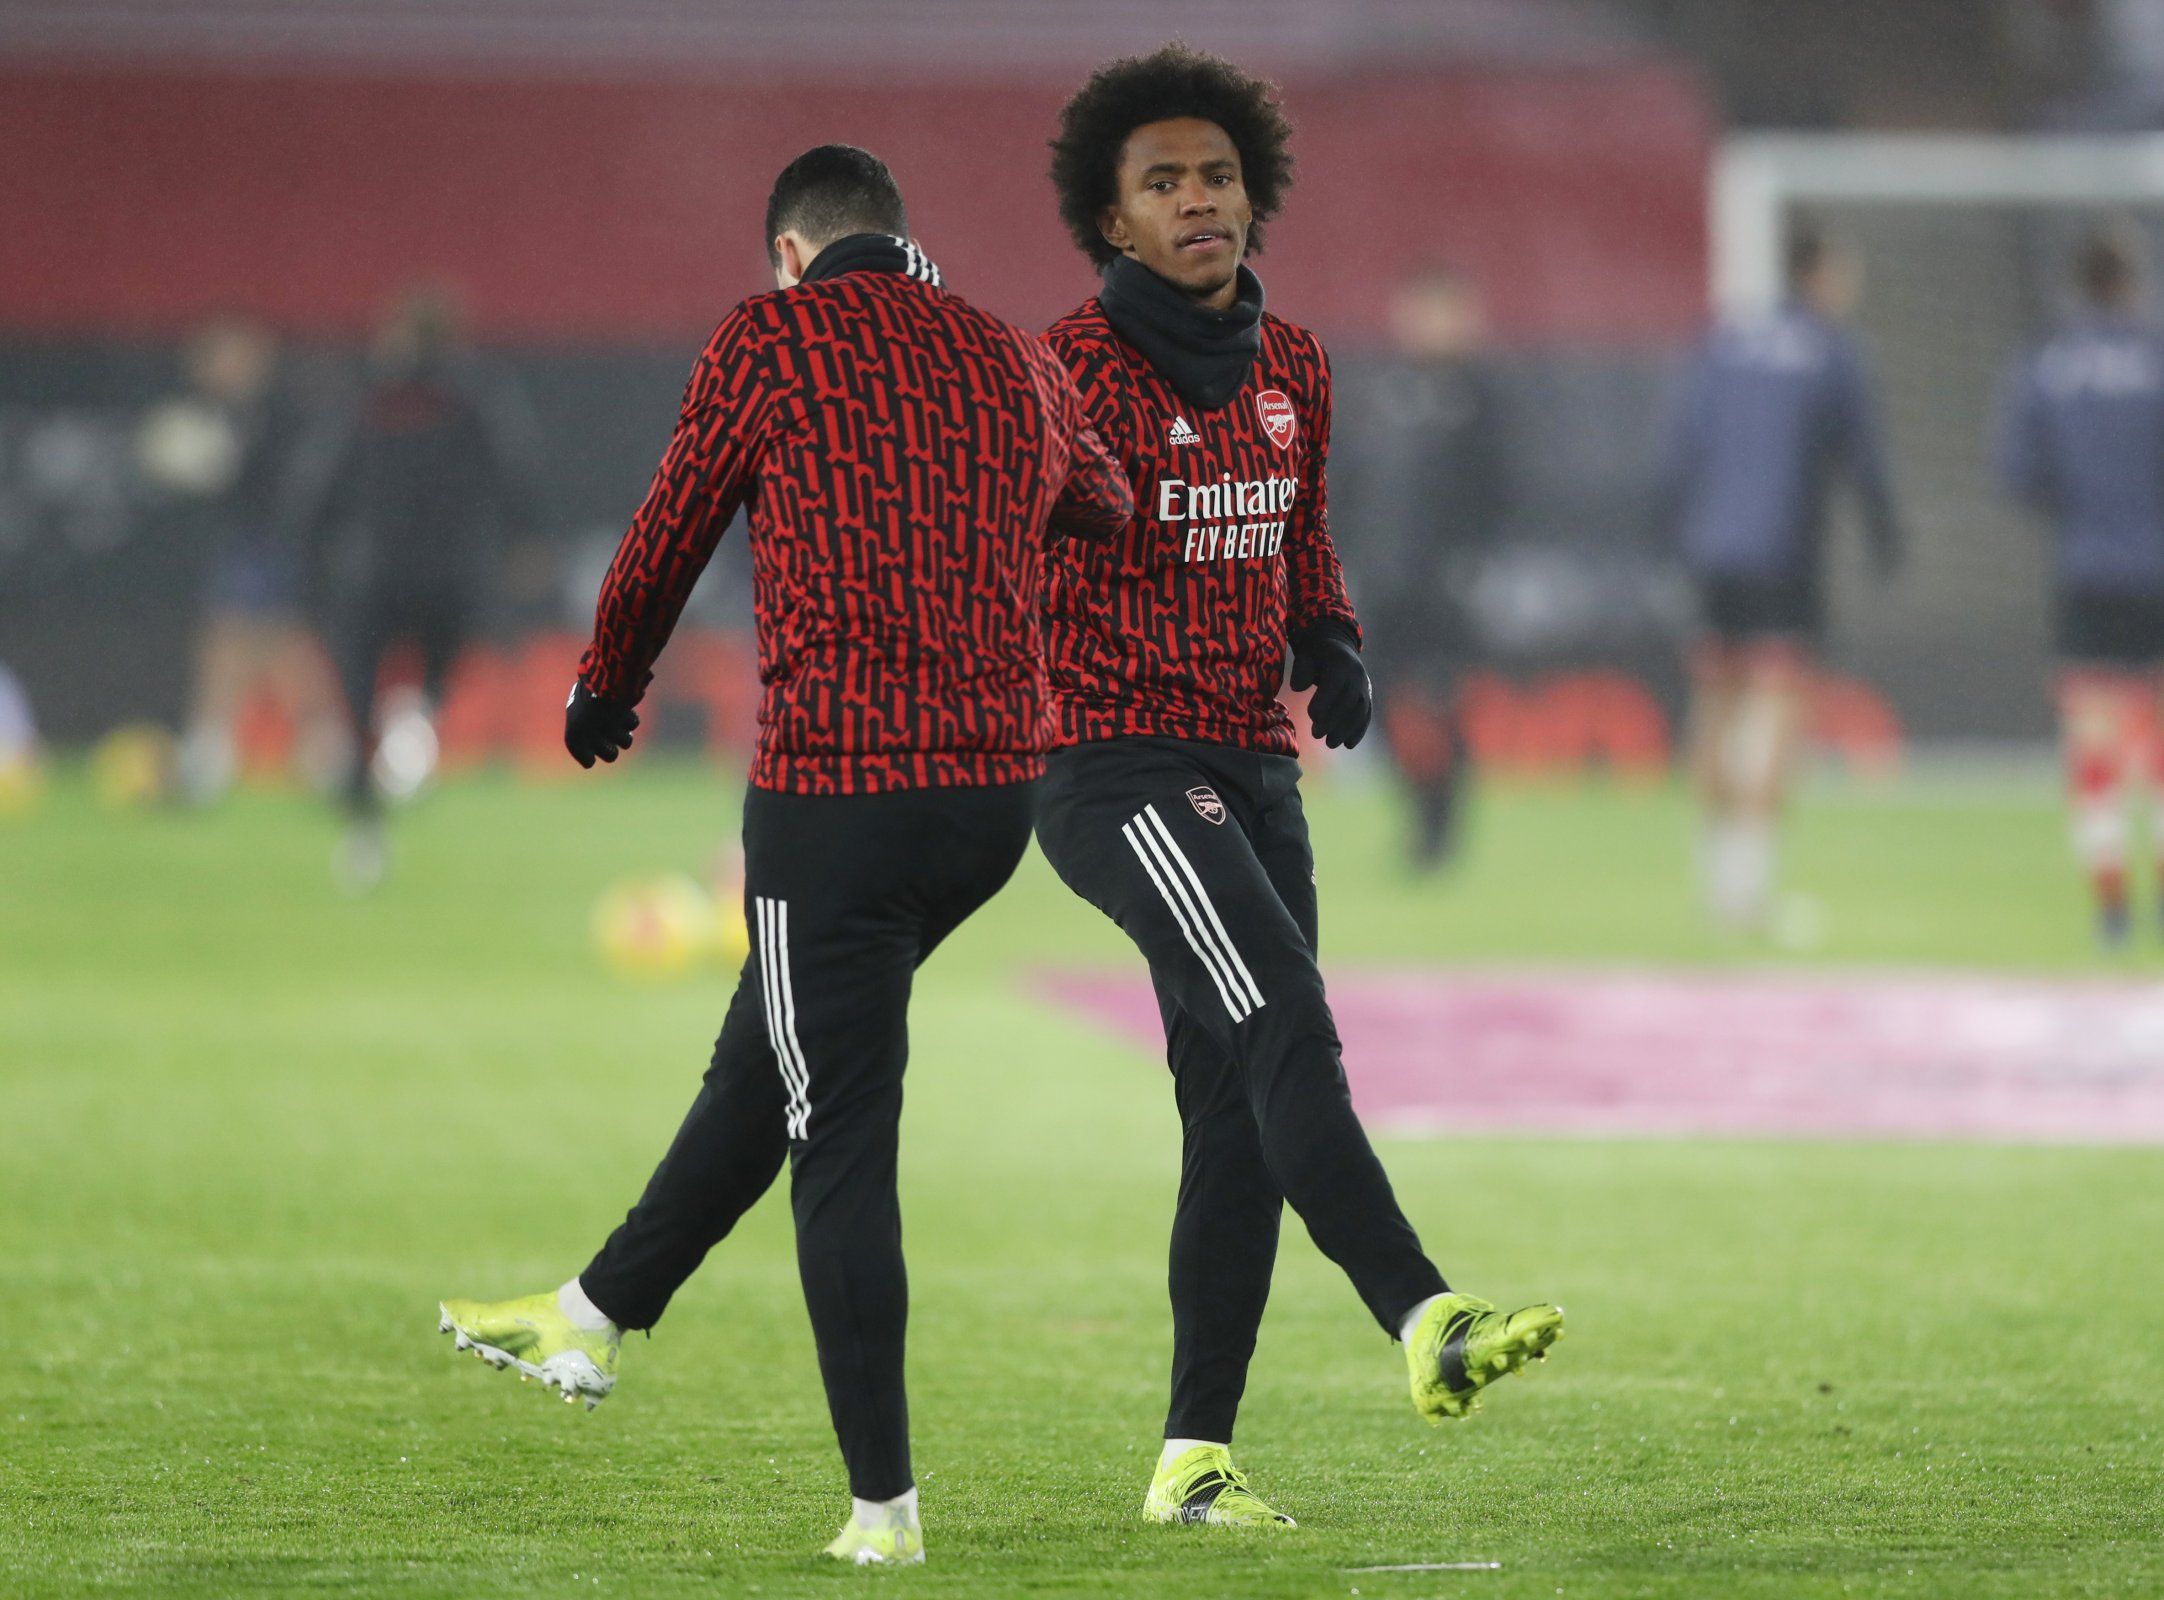 arsenal winger willian during warm-up against southampton premier league